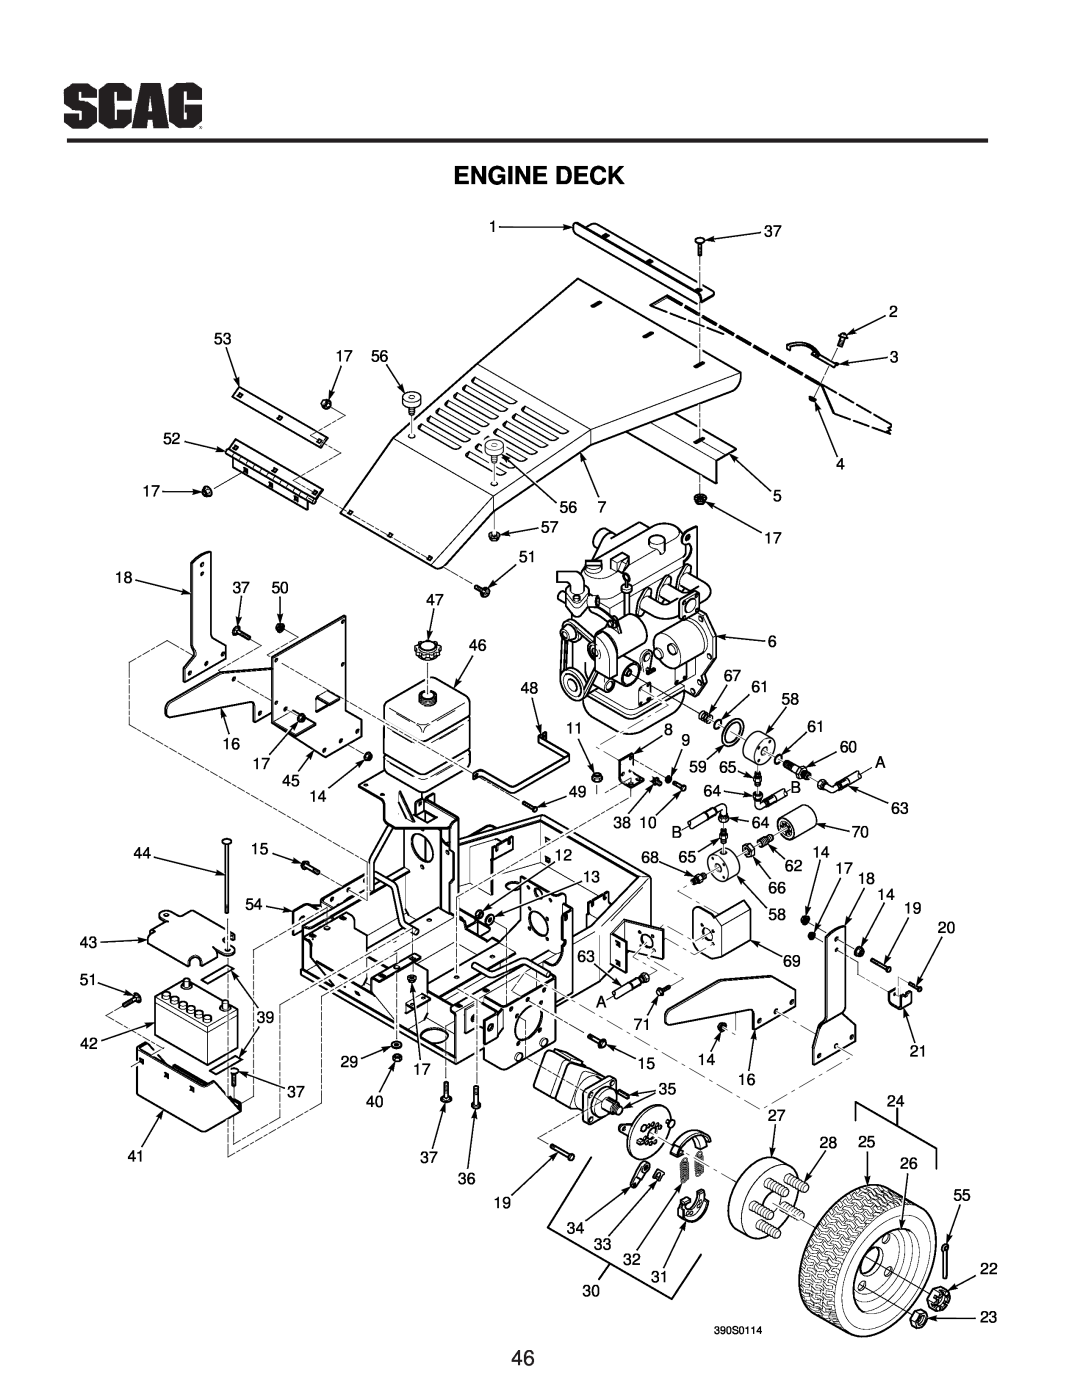 Scag Power Equipment MAG manual Engine Deck, 5 56, 390S0114 